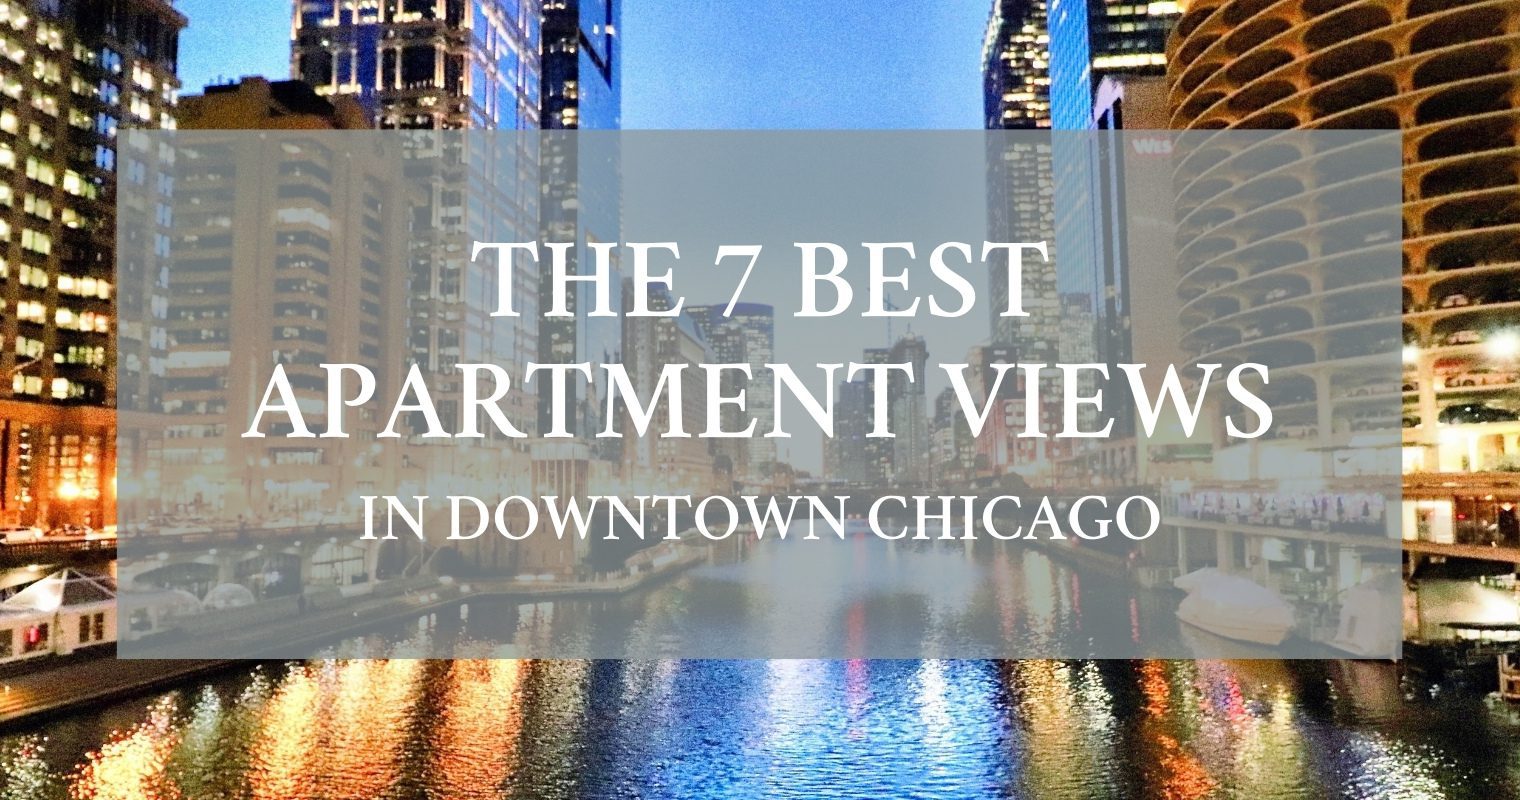 The 7 Best Apartment Views in Downtown Chicago